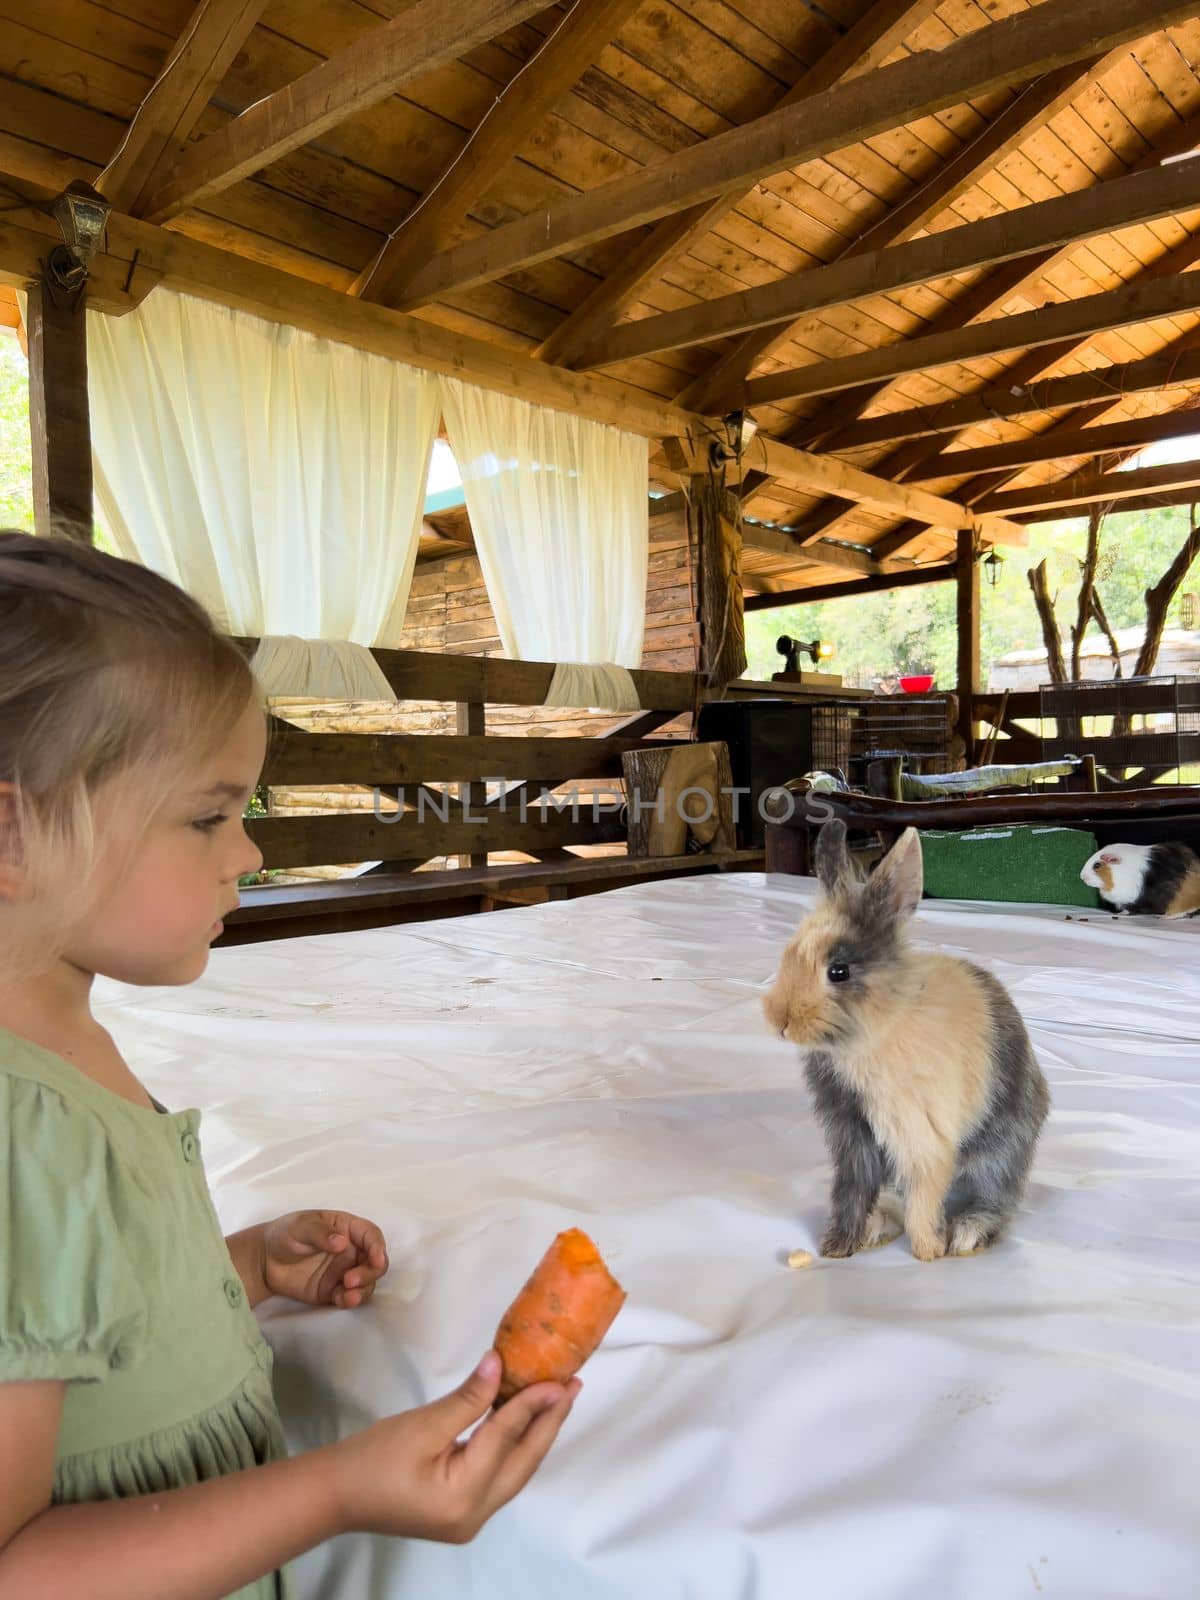 Little girl with a carrot stands near a rabbit under a canopy. High quality photo